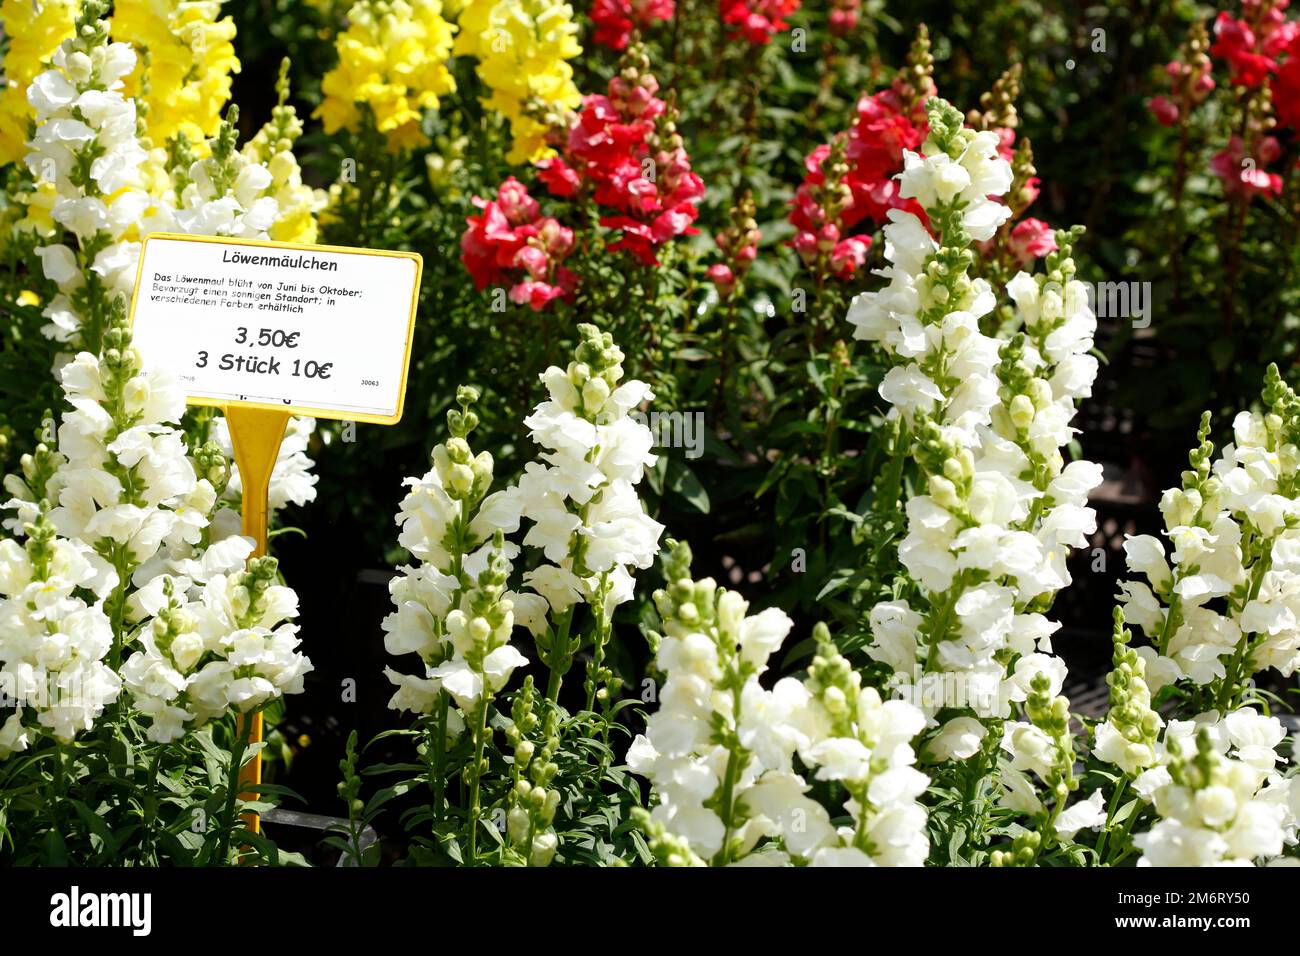 Common snapdragon (Antirrhinum majus) with price tag at a flower market, Germany Stock Photo